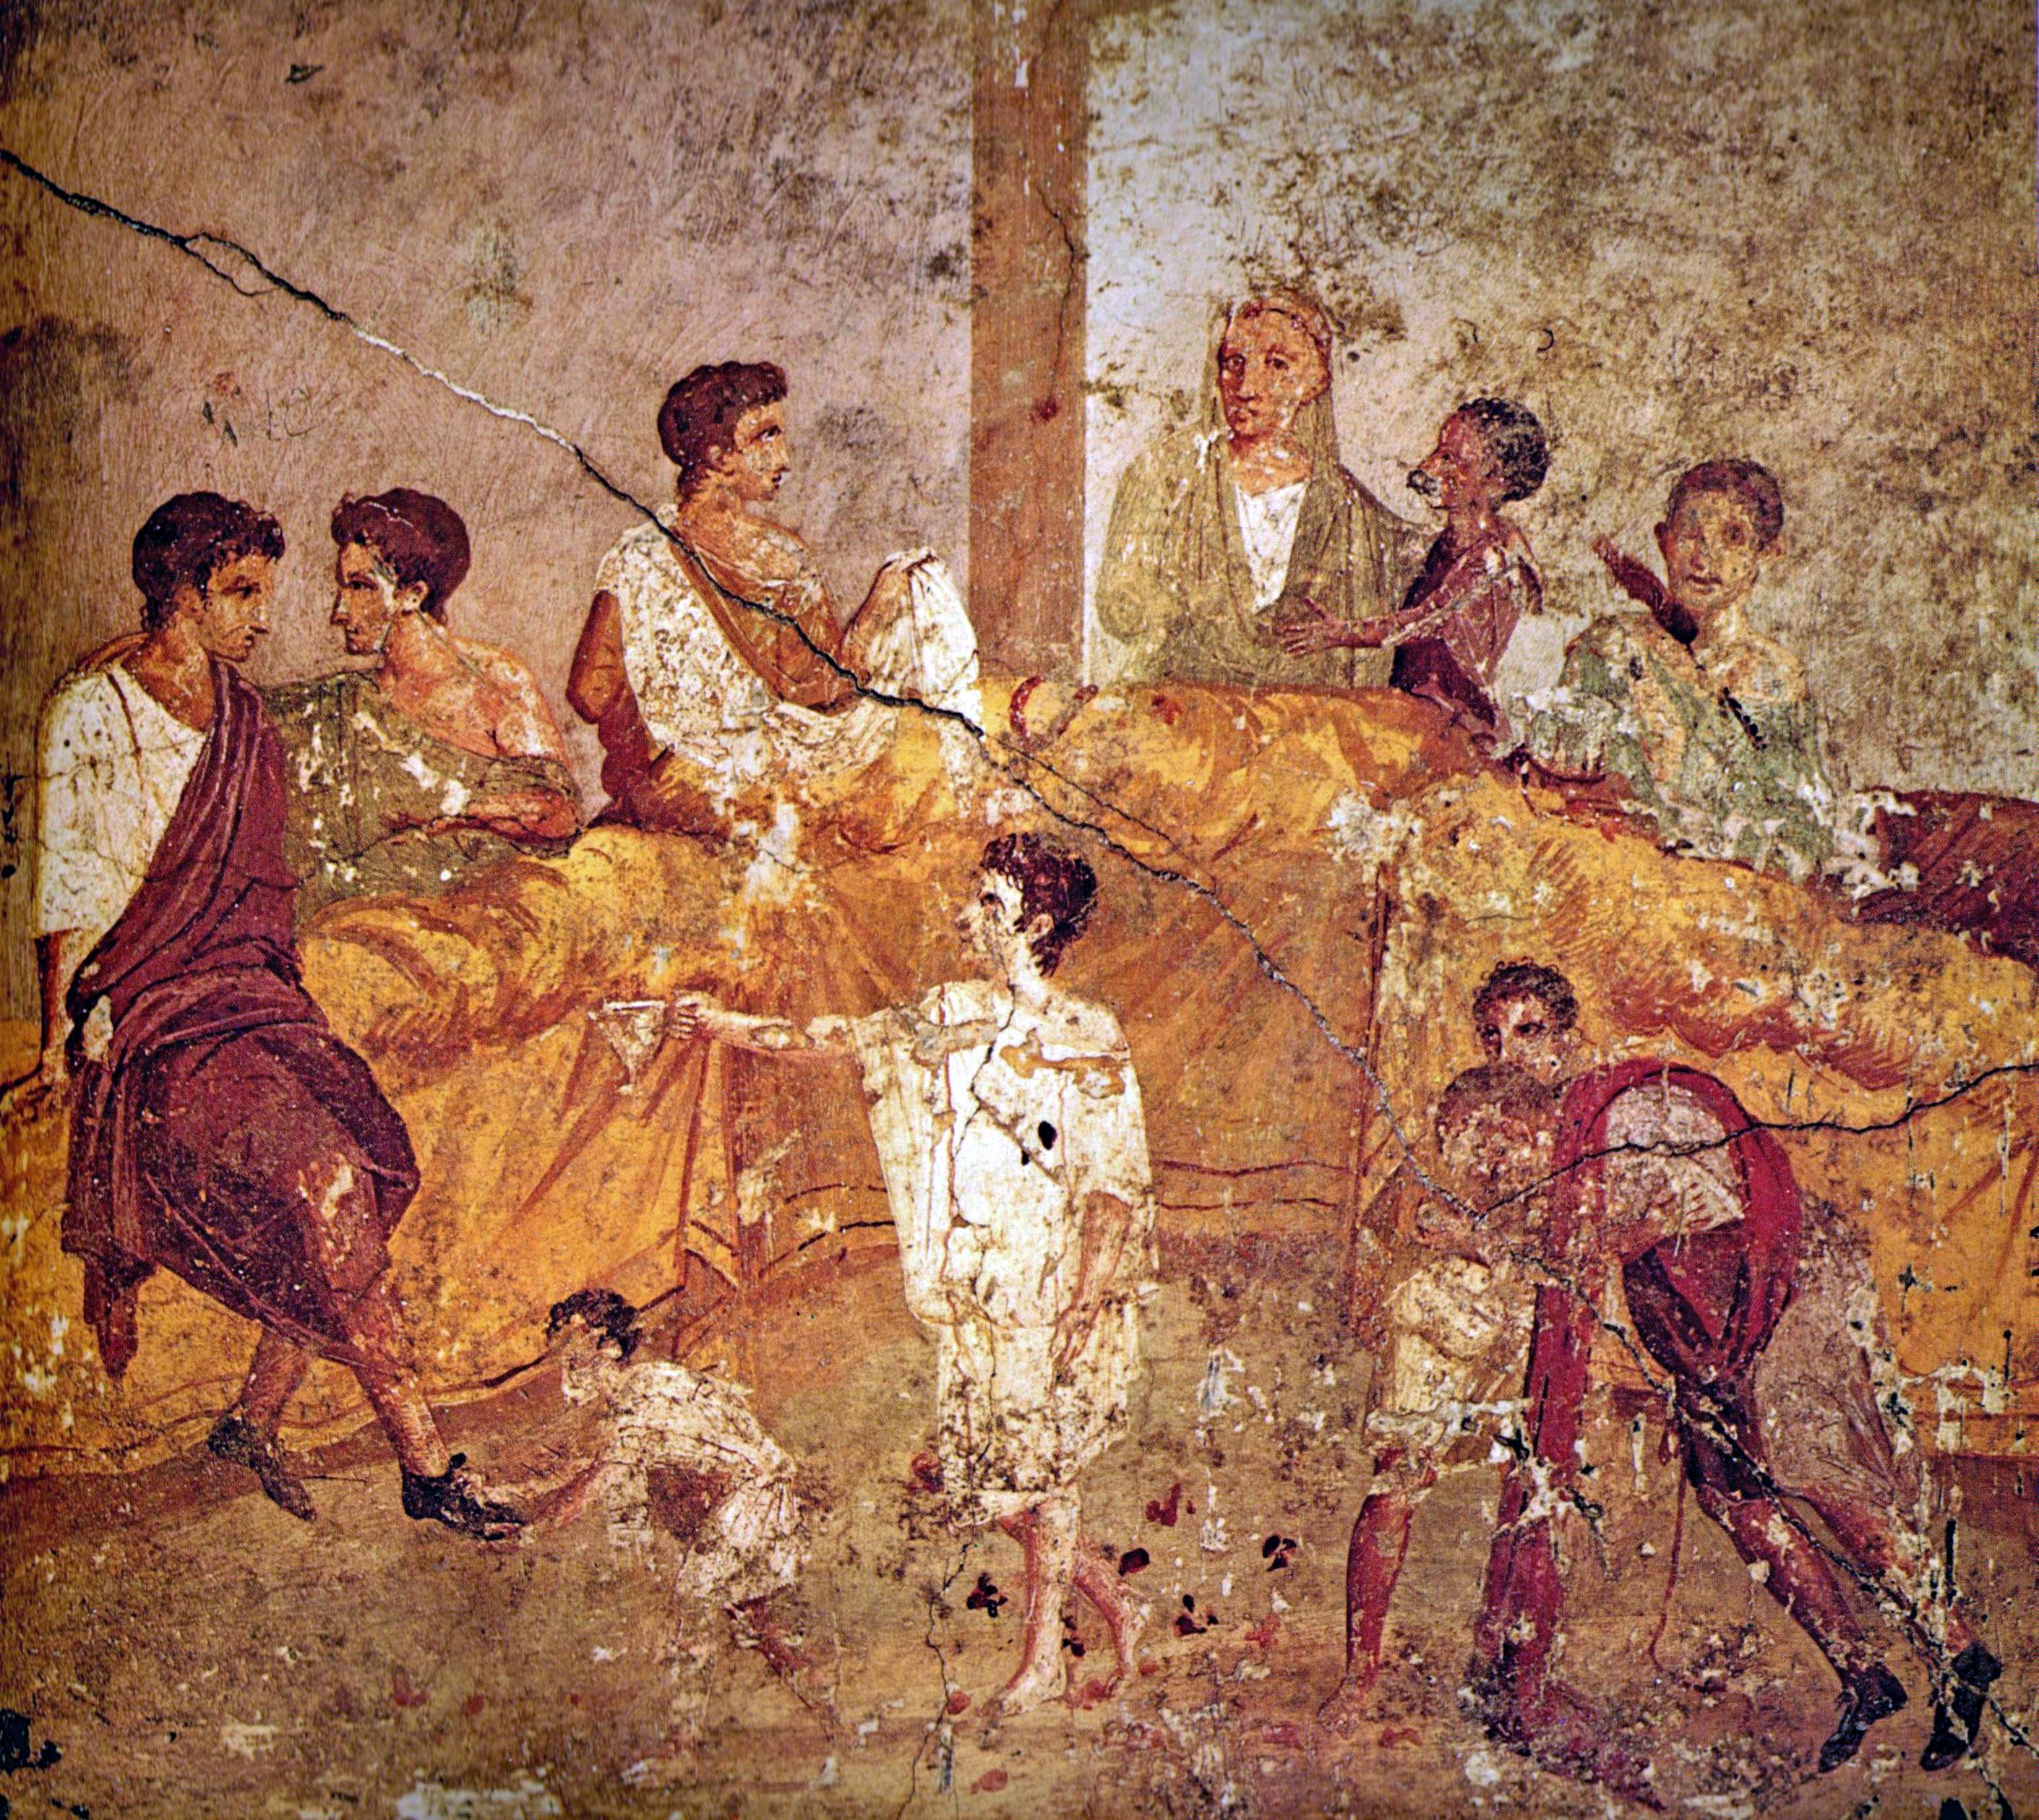 “Pompeii Family Feast”, Naples National Archaeological Museum, a fresco painted prior to 79 CE